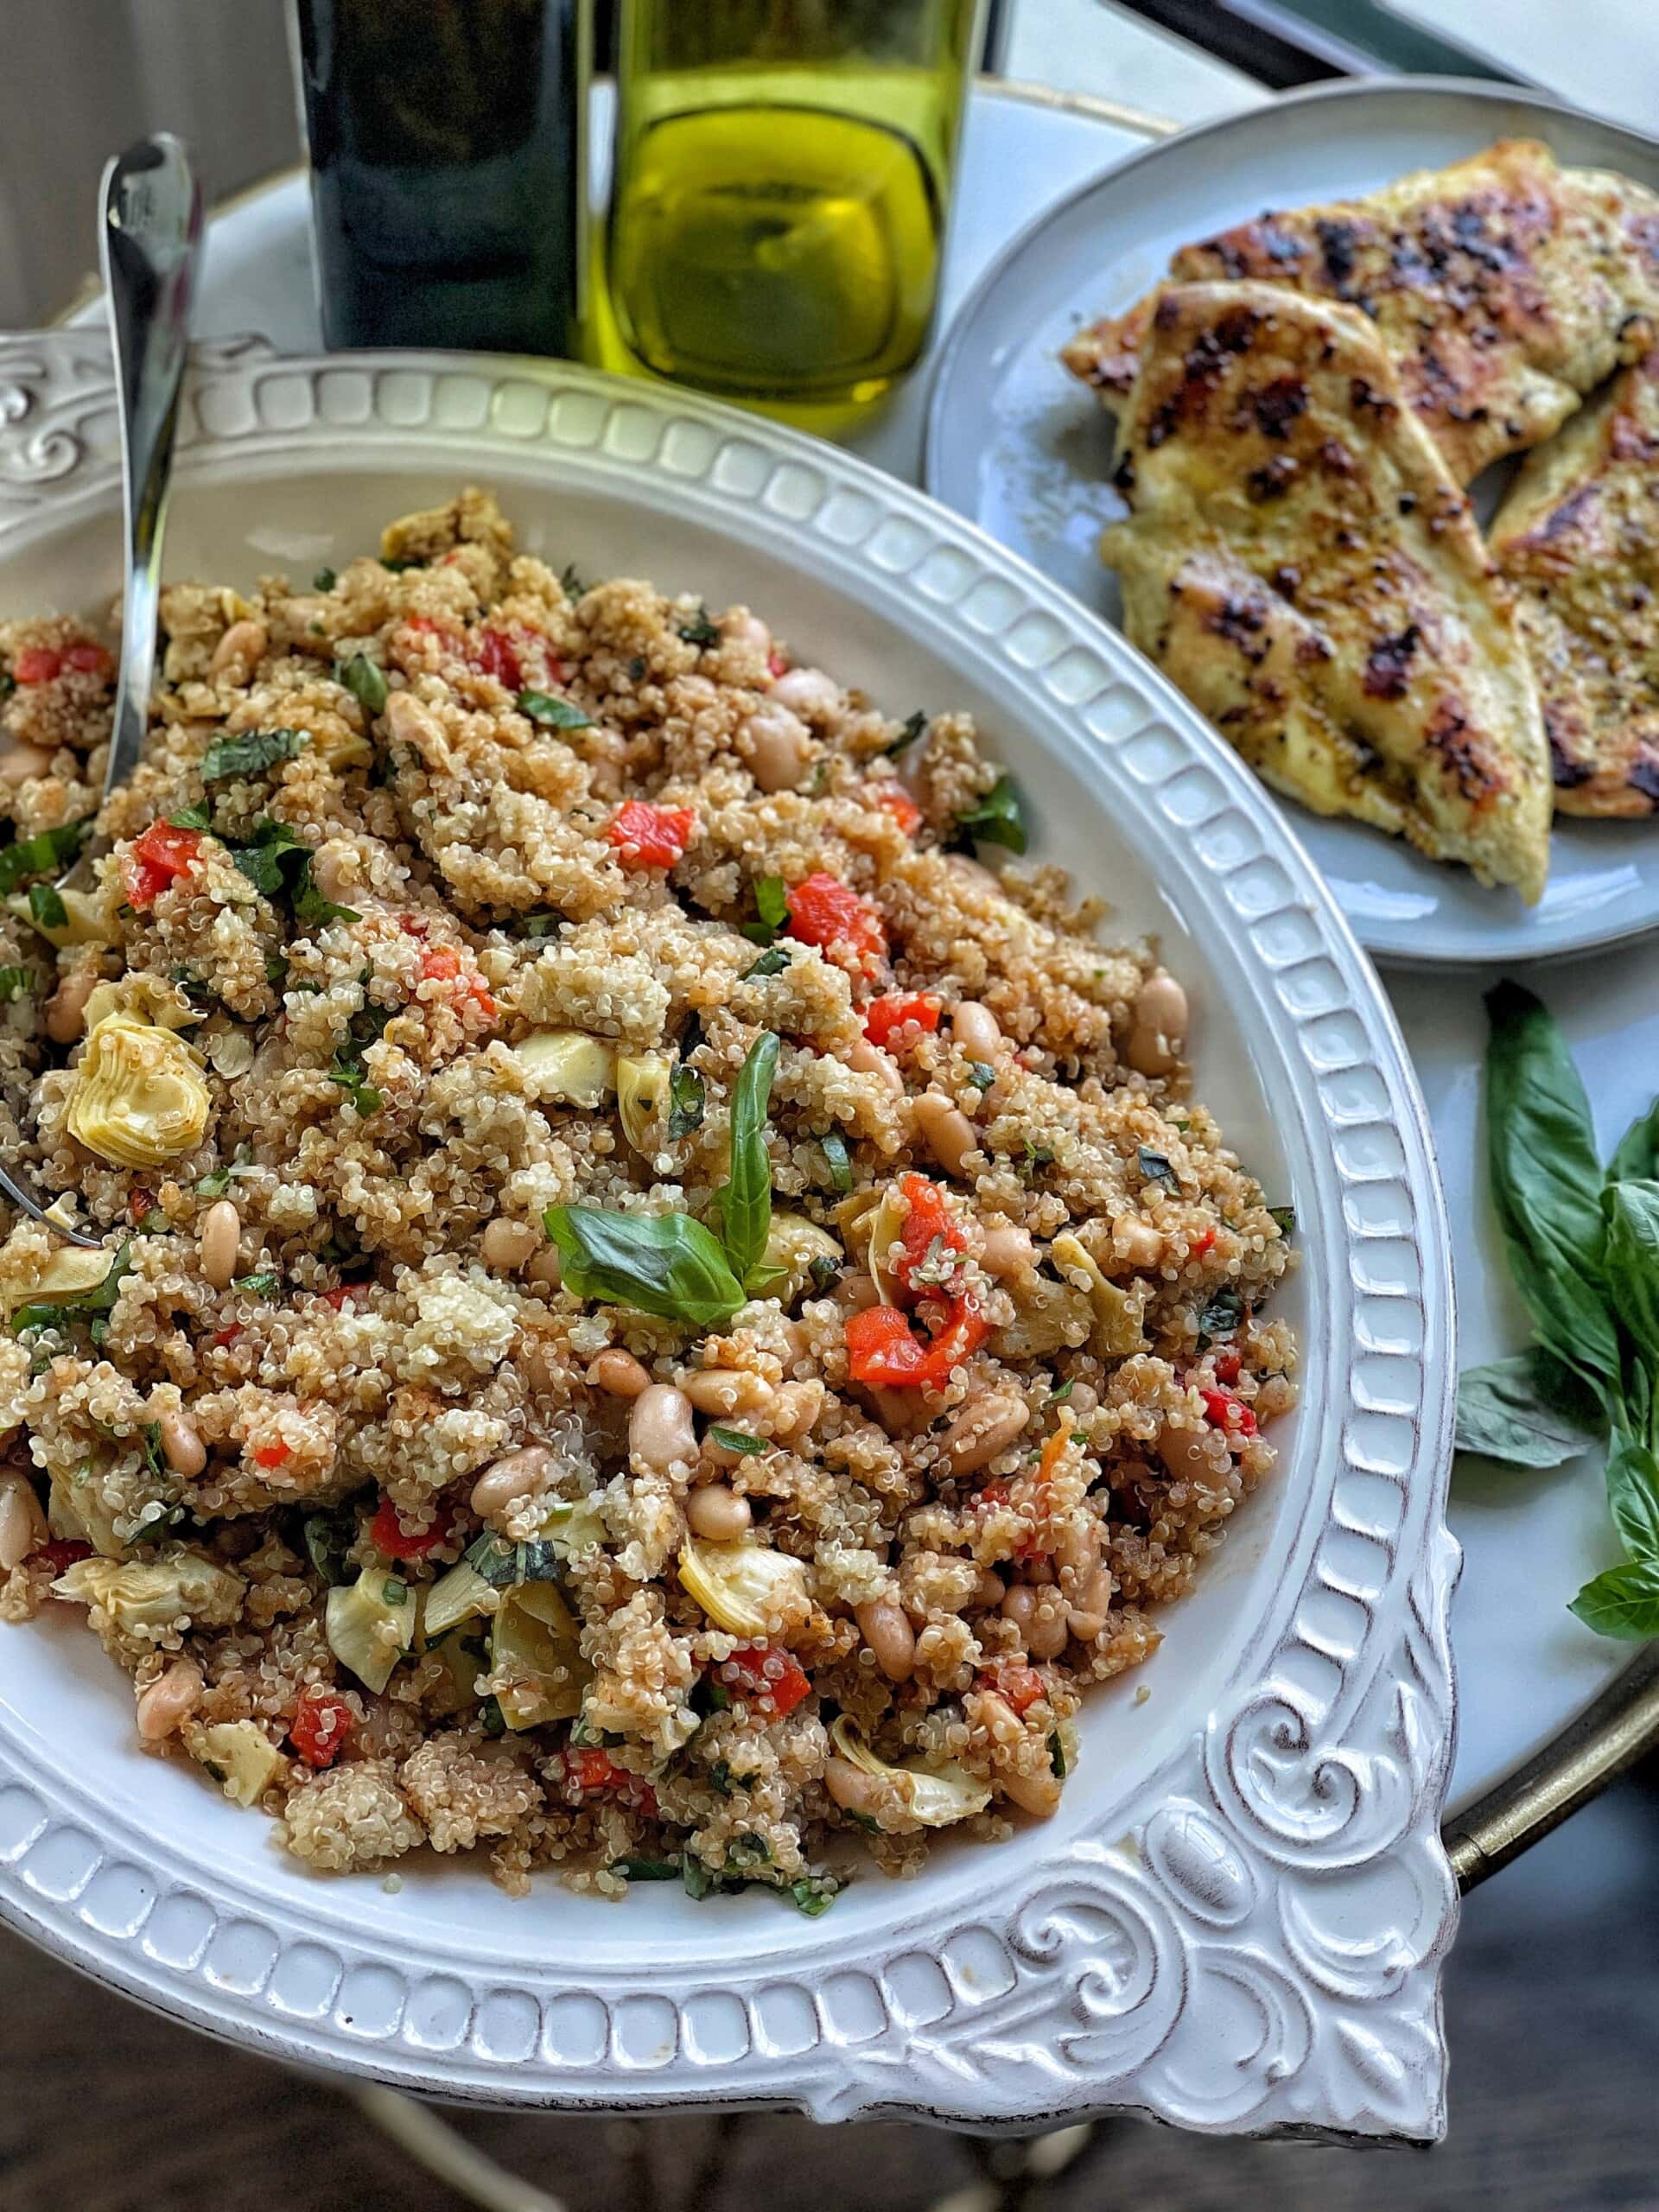 Italian Quinoa Salad with Vegetables and Cannellini Beans